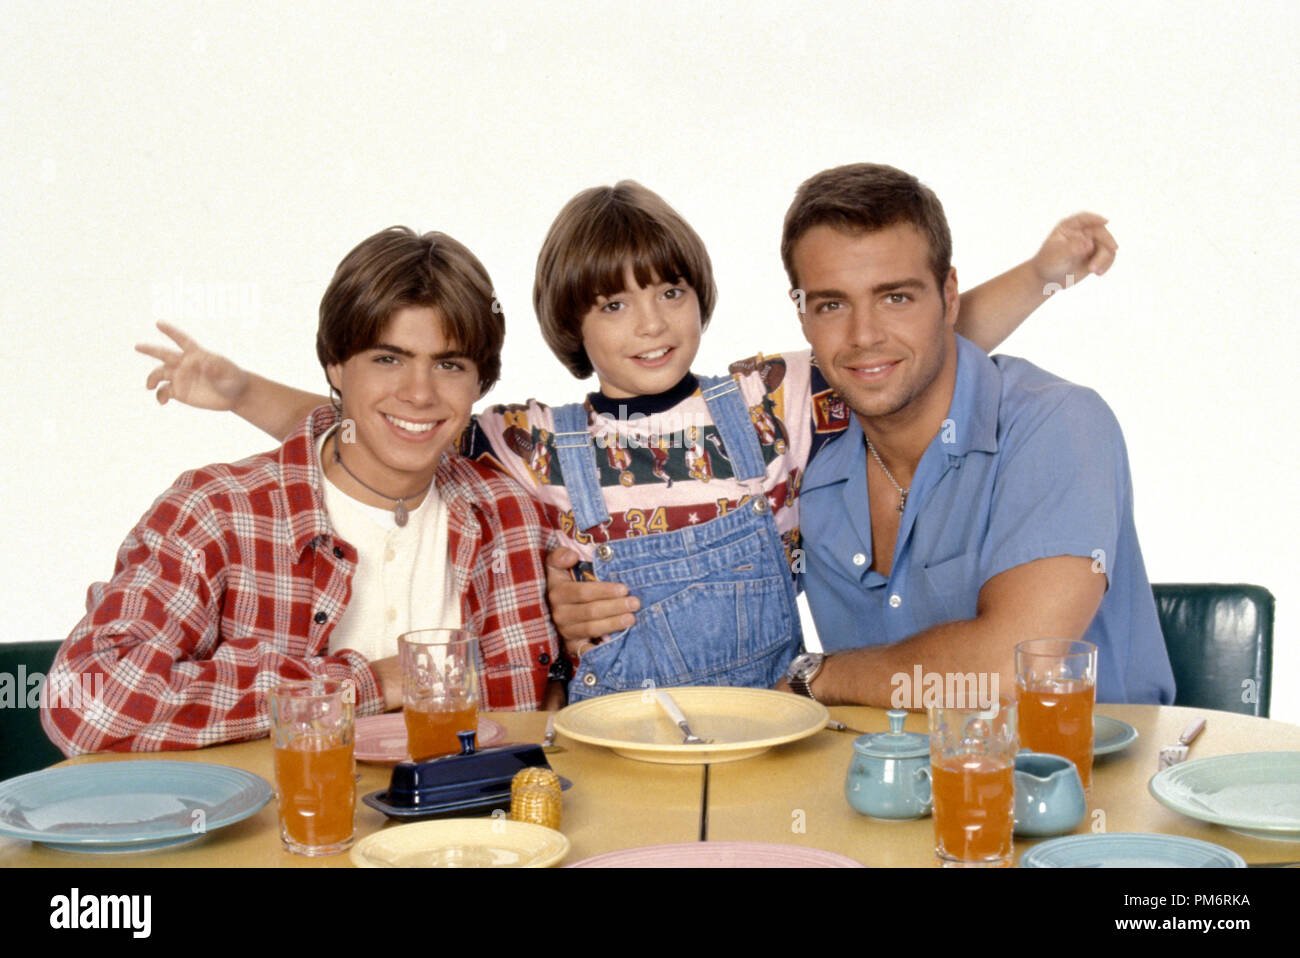 Film Still from "Brotherly Love" Matthew Lawrence, Andrew Lawrence, Joey Lawrence 1995   File Reference # 31043591THA  For Editorial Use Only - All Rights Reserved Stock Photo